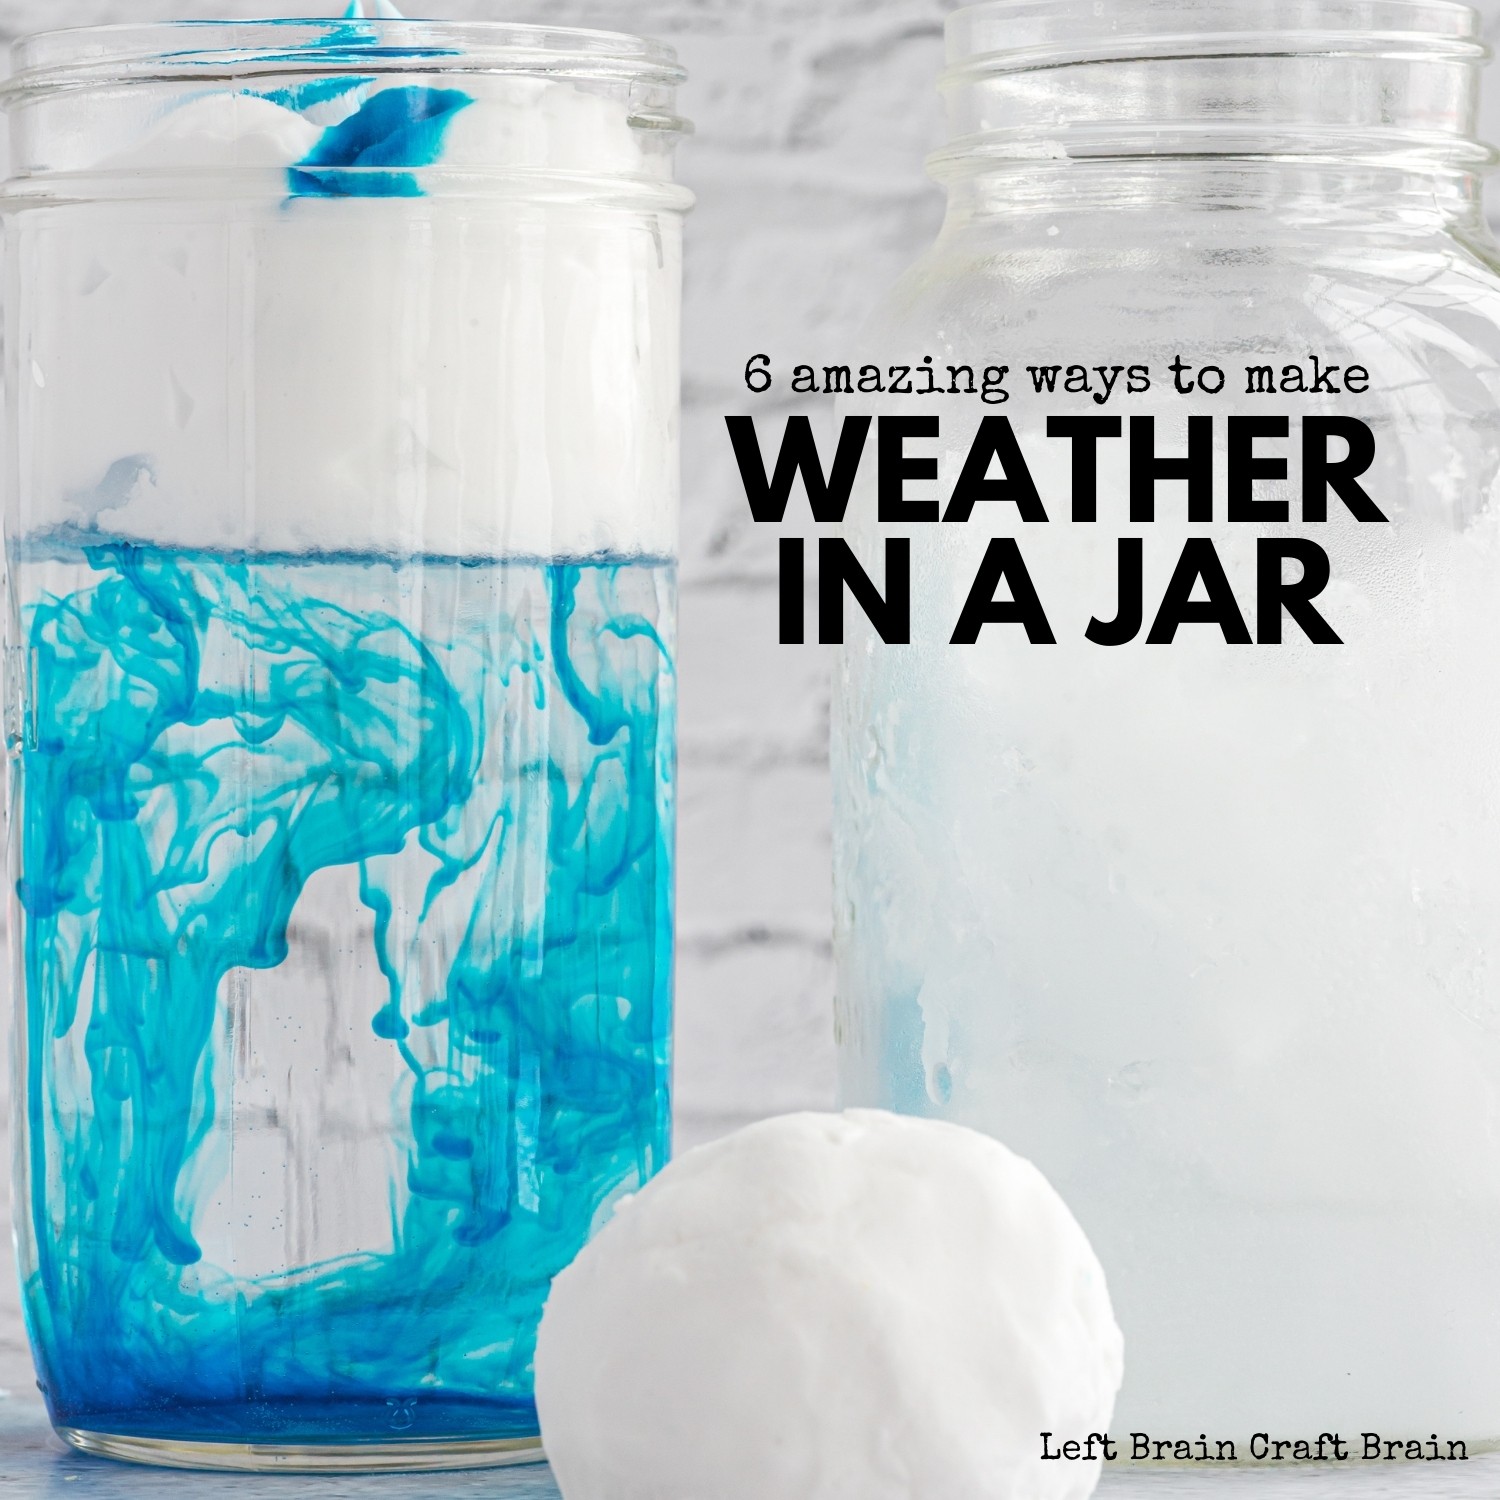 Kids will love these 6 amazing weather in a jar science experiments. Try rain in a jar, fake snow, make rainbows, clouds, tornadoes, and more!